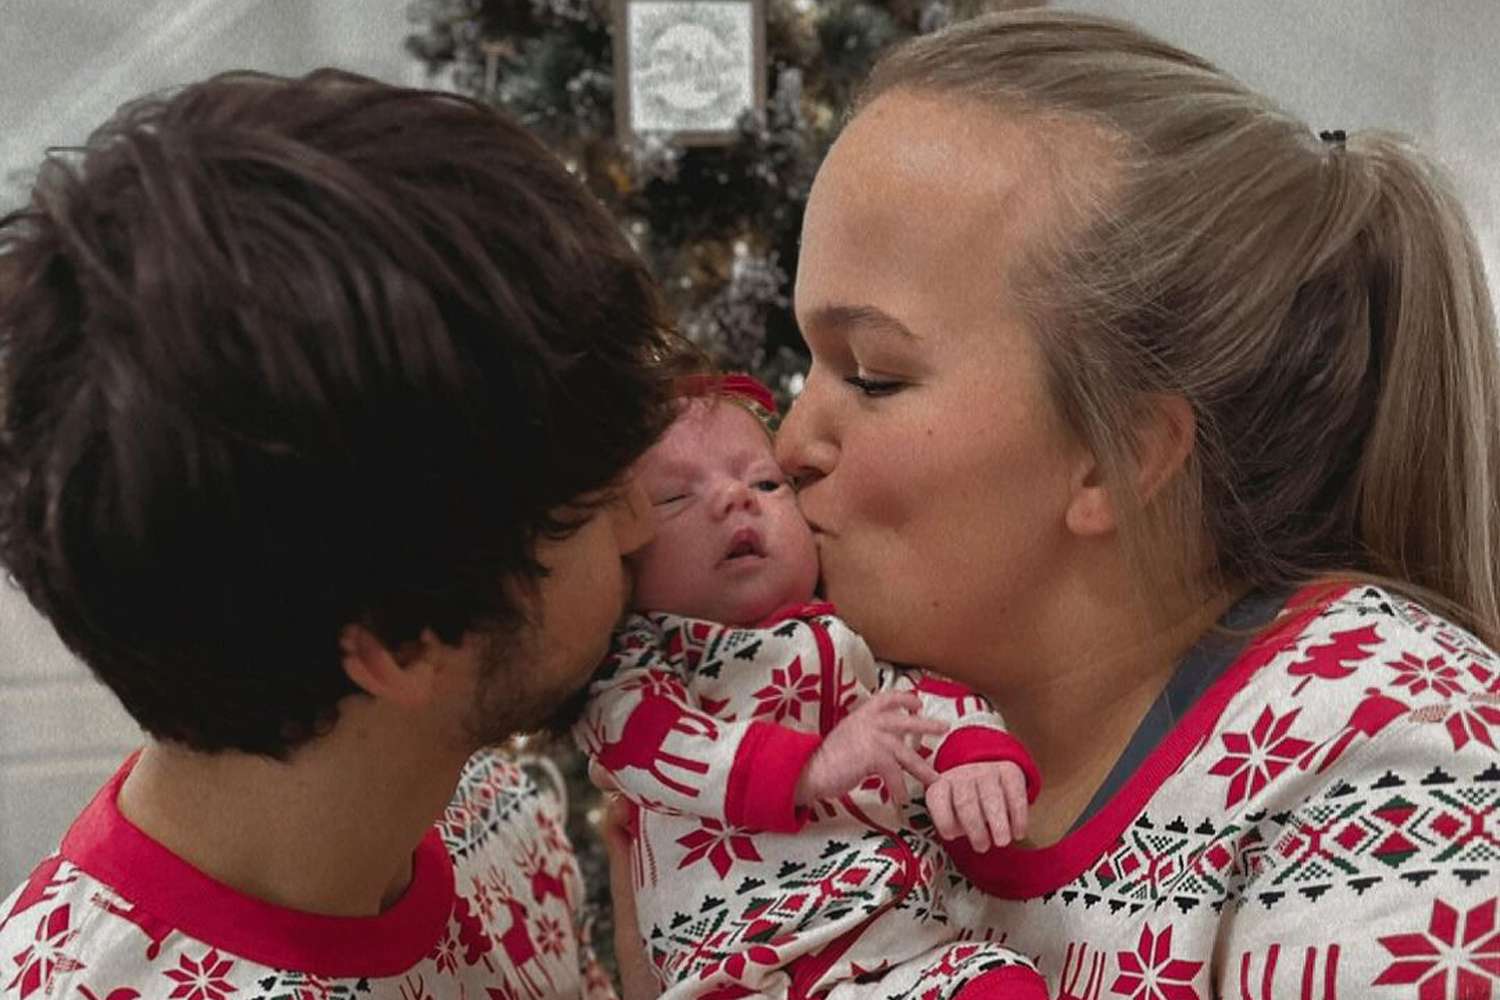 '7 Little Johnstons' Liz Wants to 'Convince' Boyfriend to Have Another Baby: 'Try for a Little Person' (Exclusive)